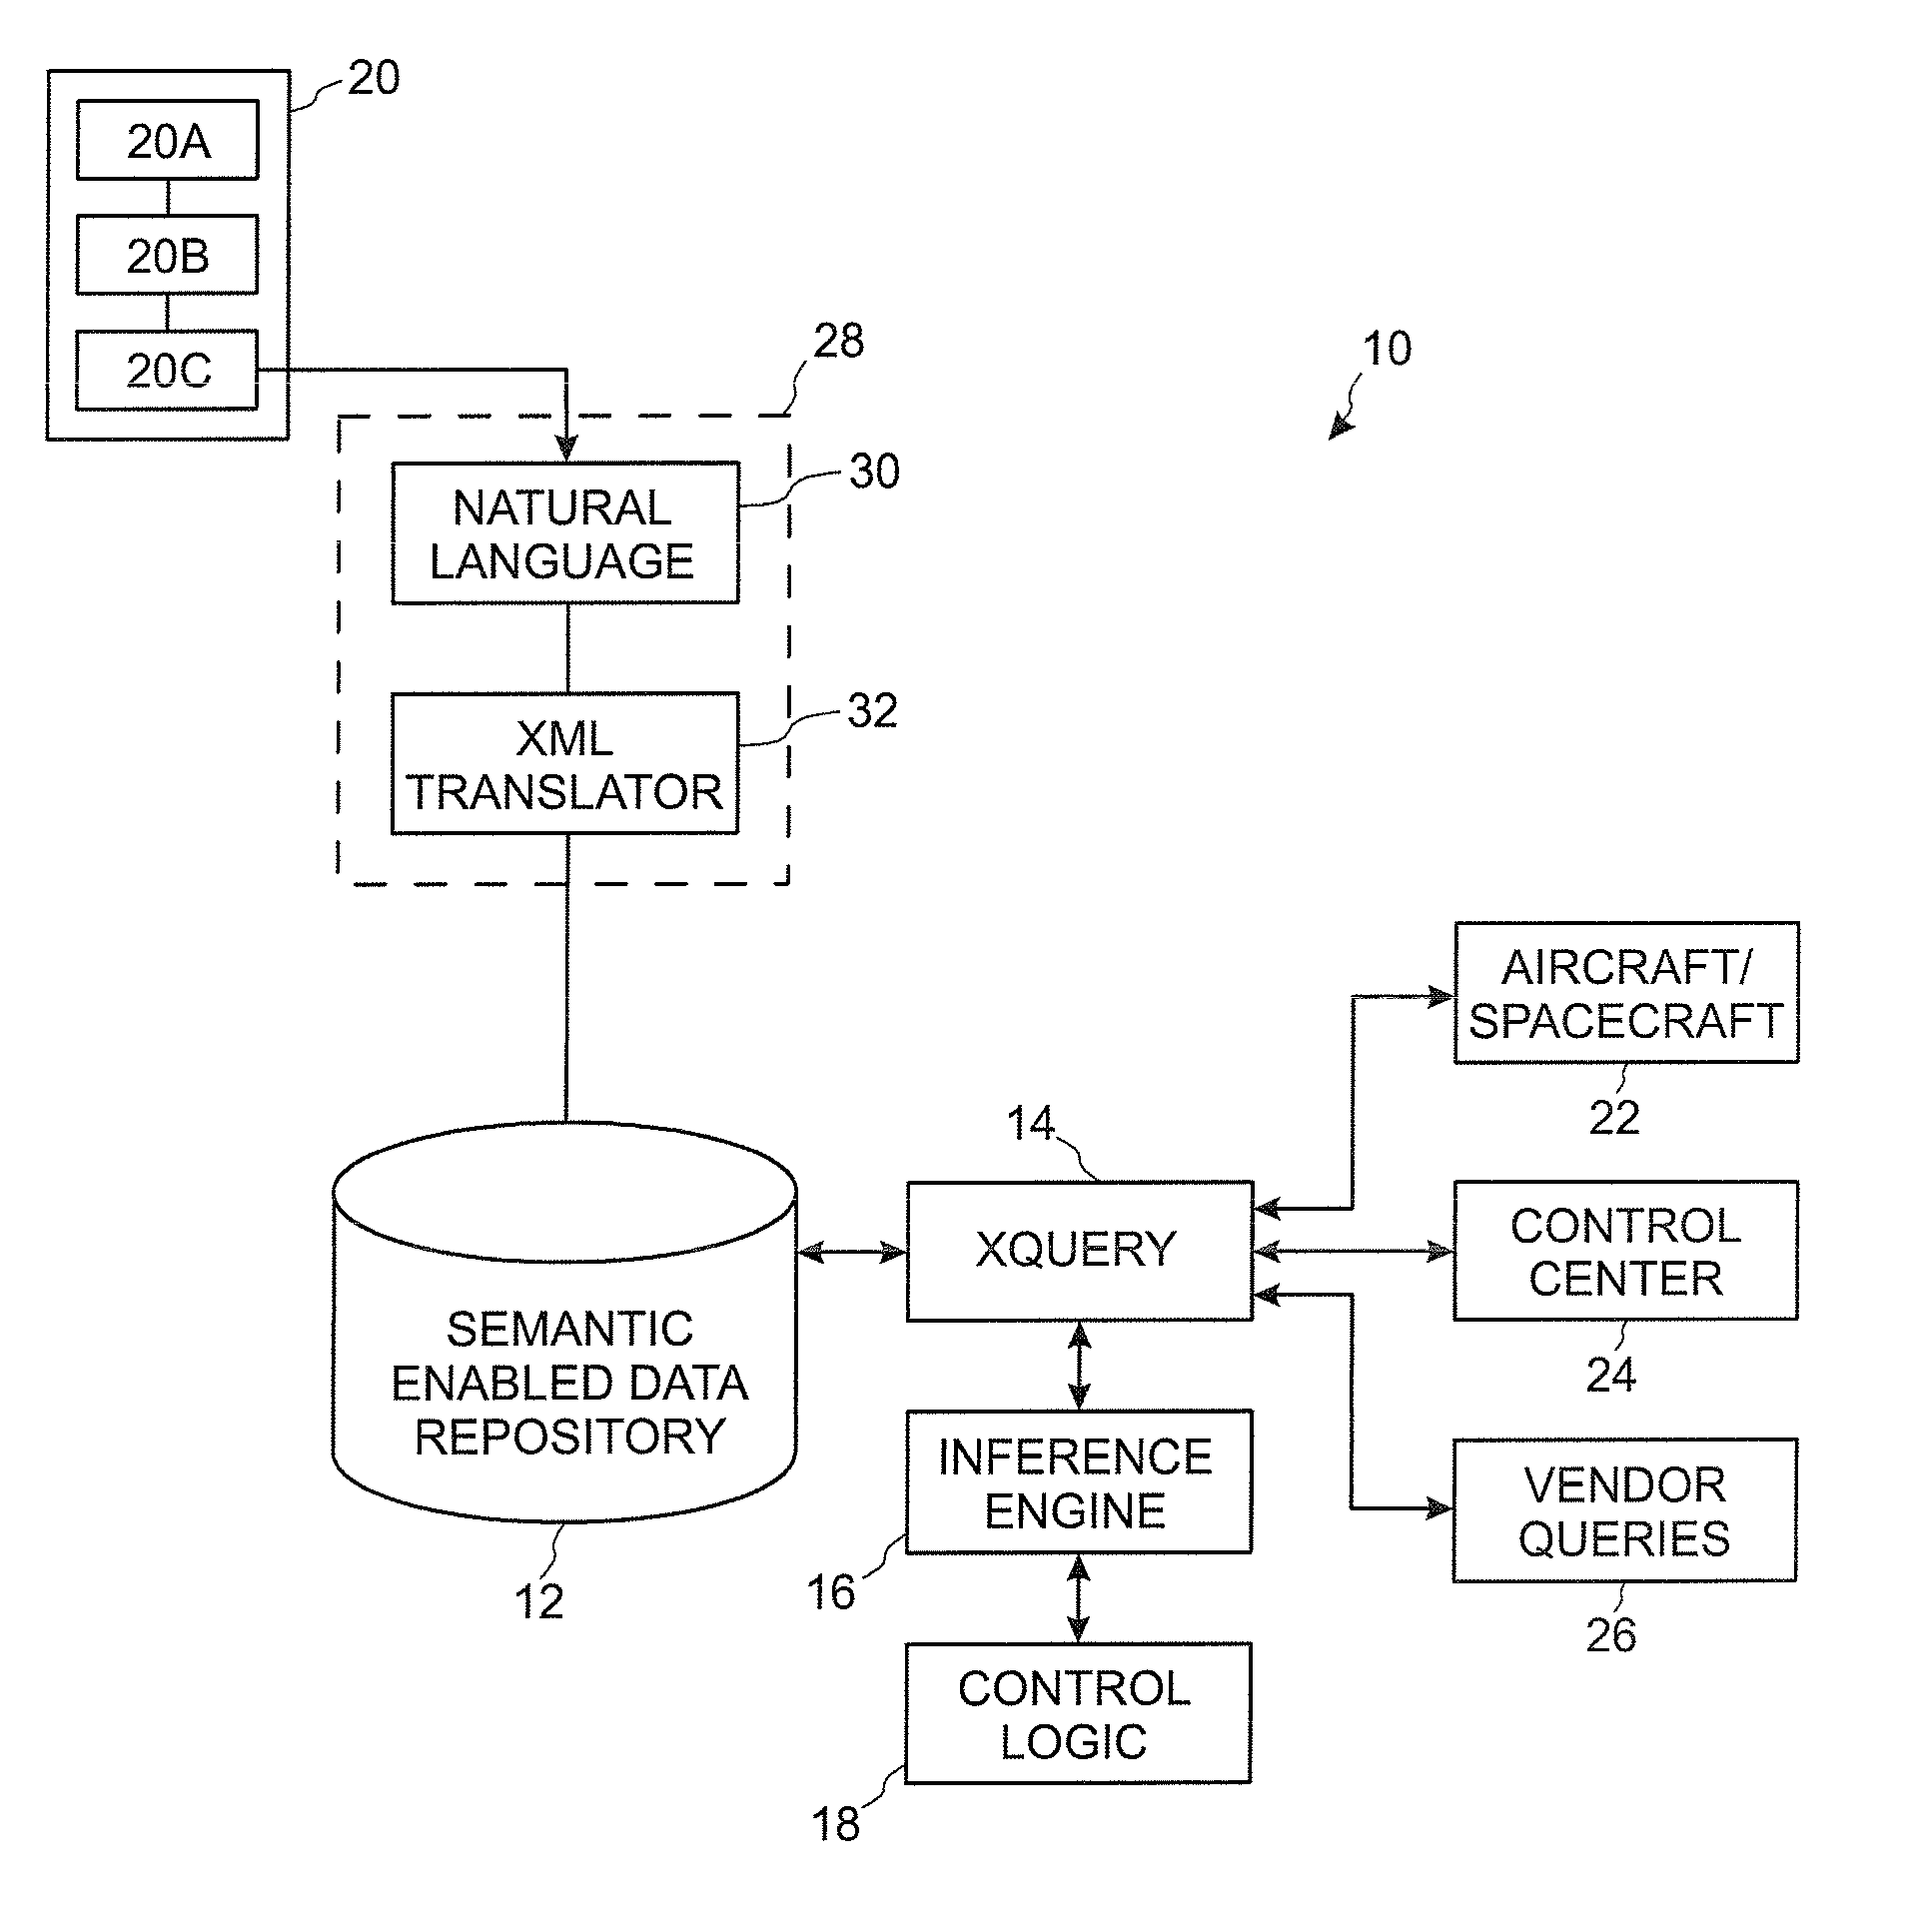 System and method for responding to ground and flight system malfunctions